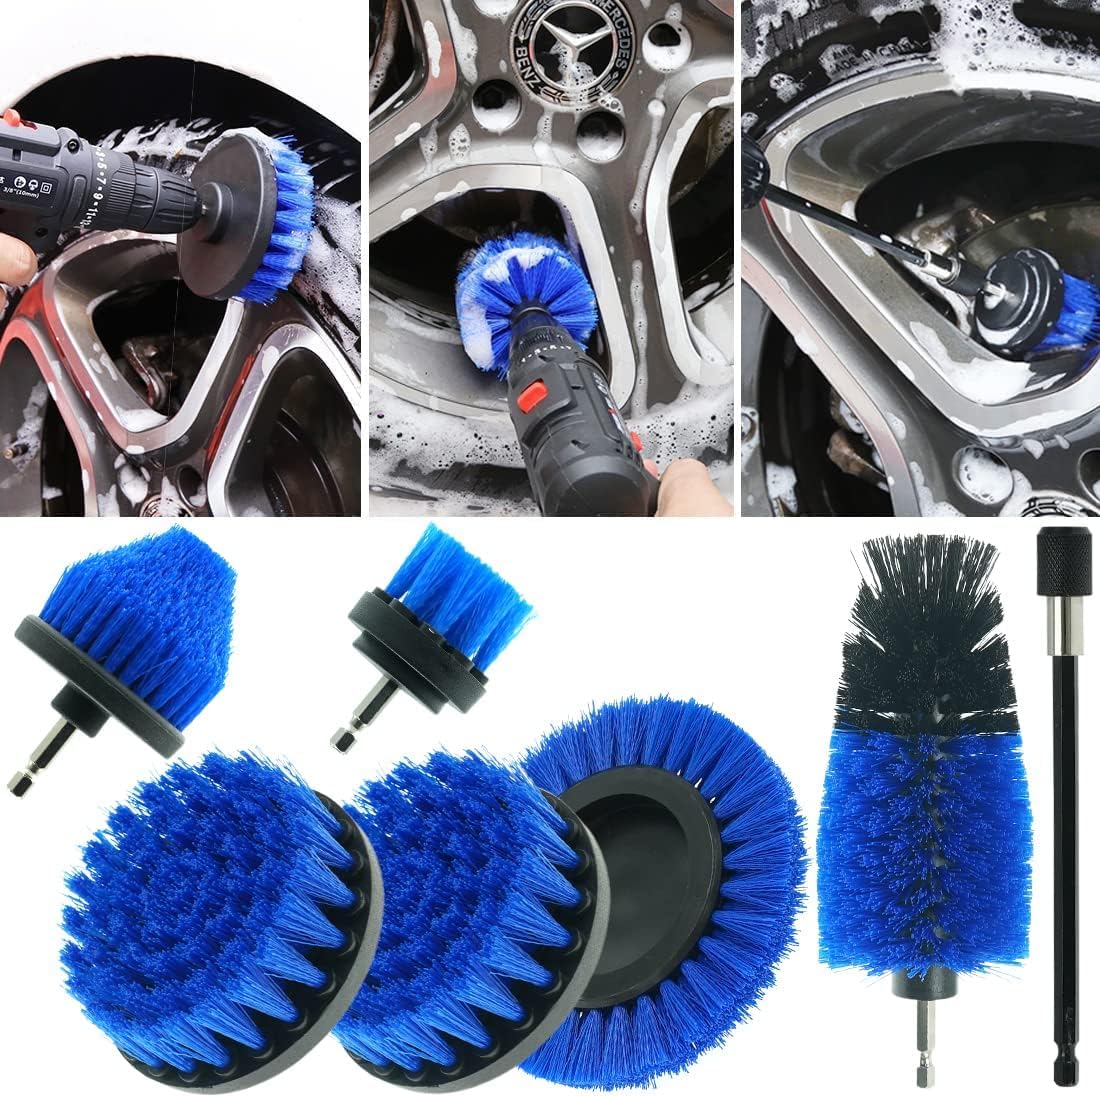 7 Pcs Drill Brush Set All Purpose Power Scrubber Cleaning Kit with Extend